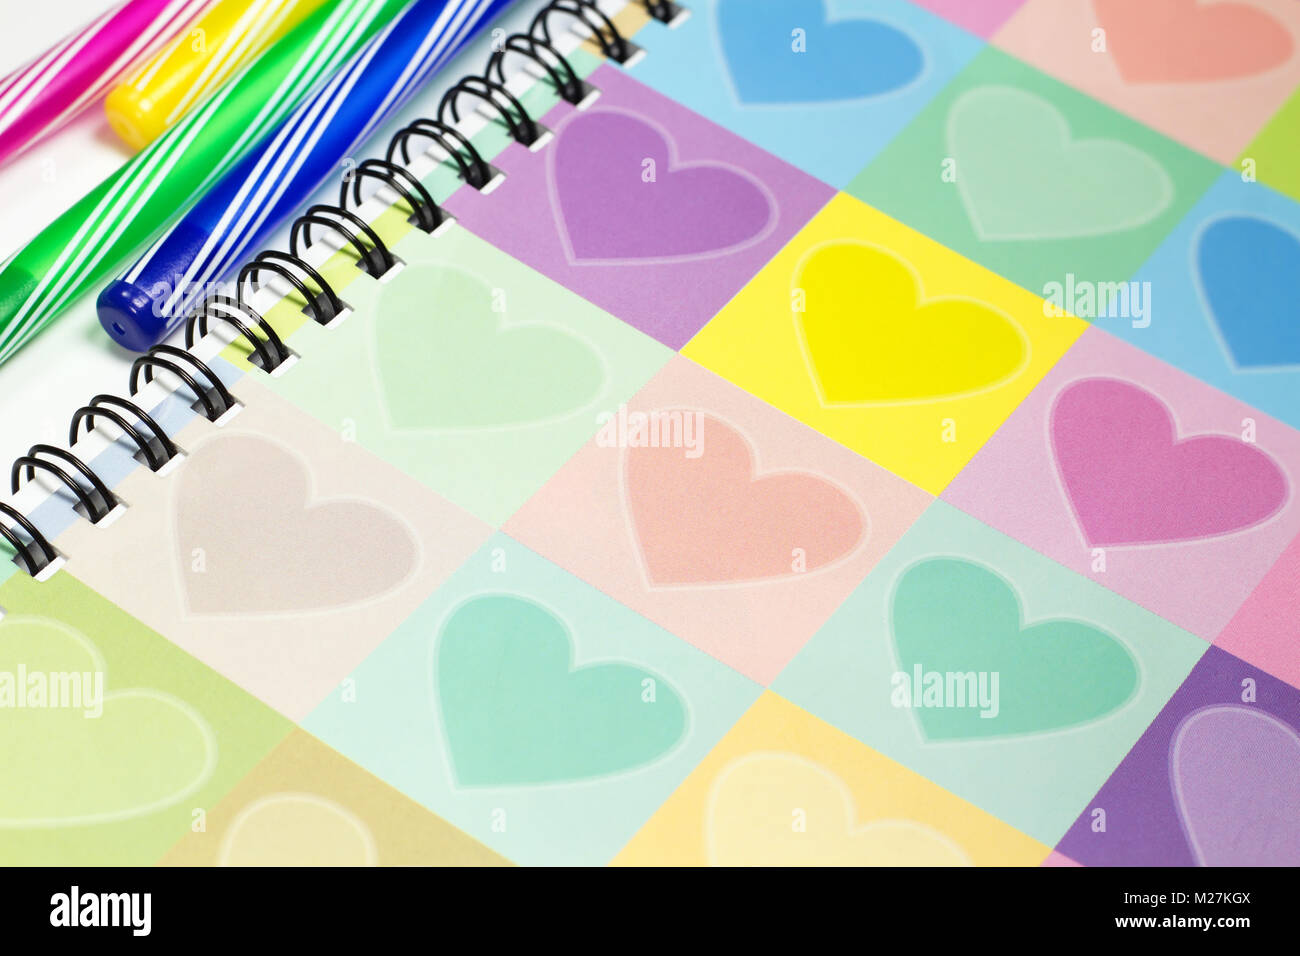 Colorful heart graphic cover notebook, diary with colorful pen for business concept Stock Photo